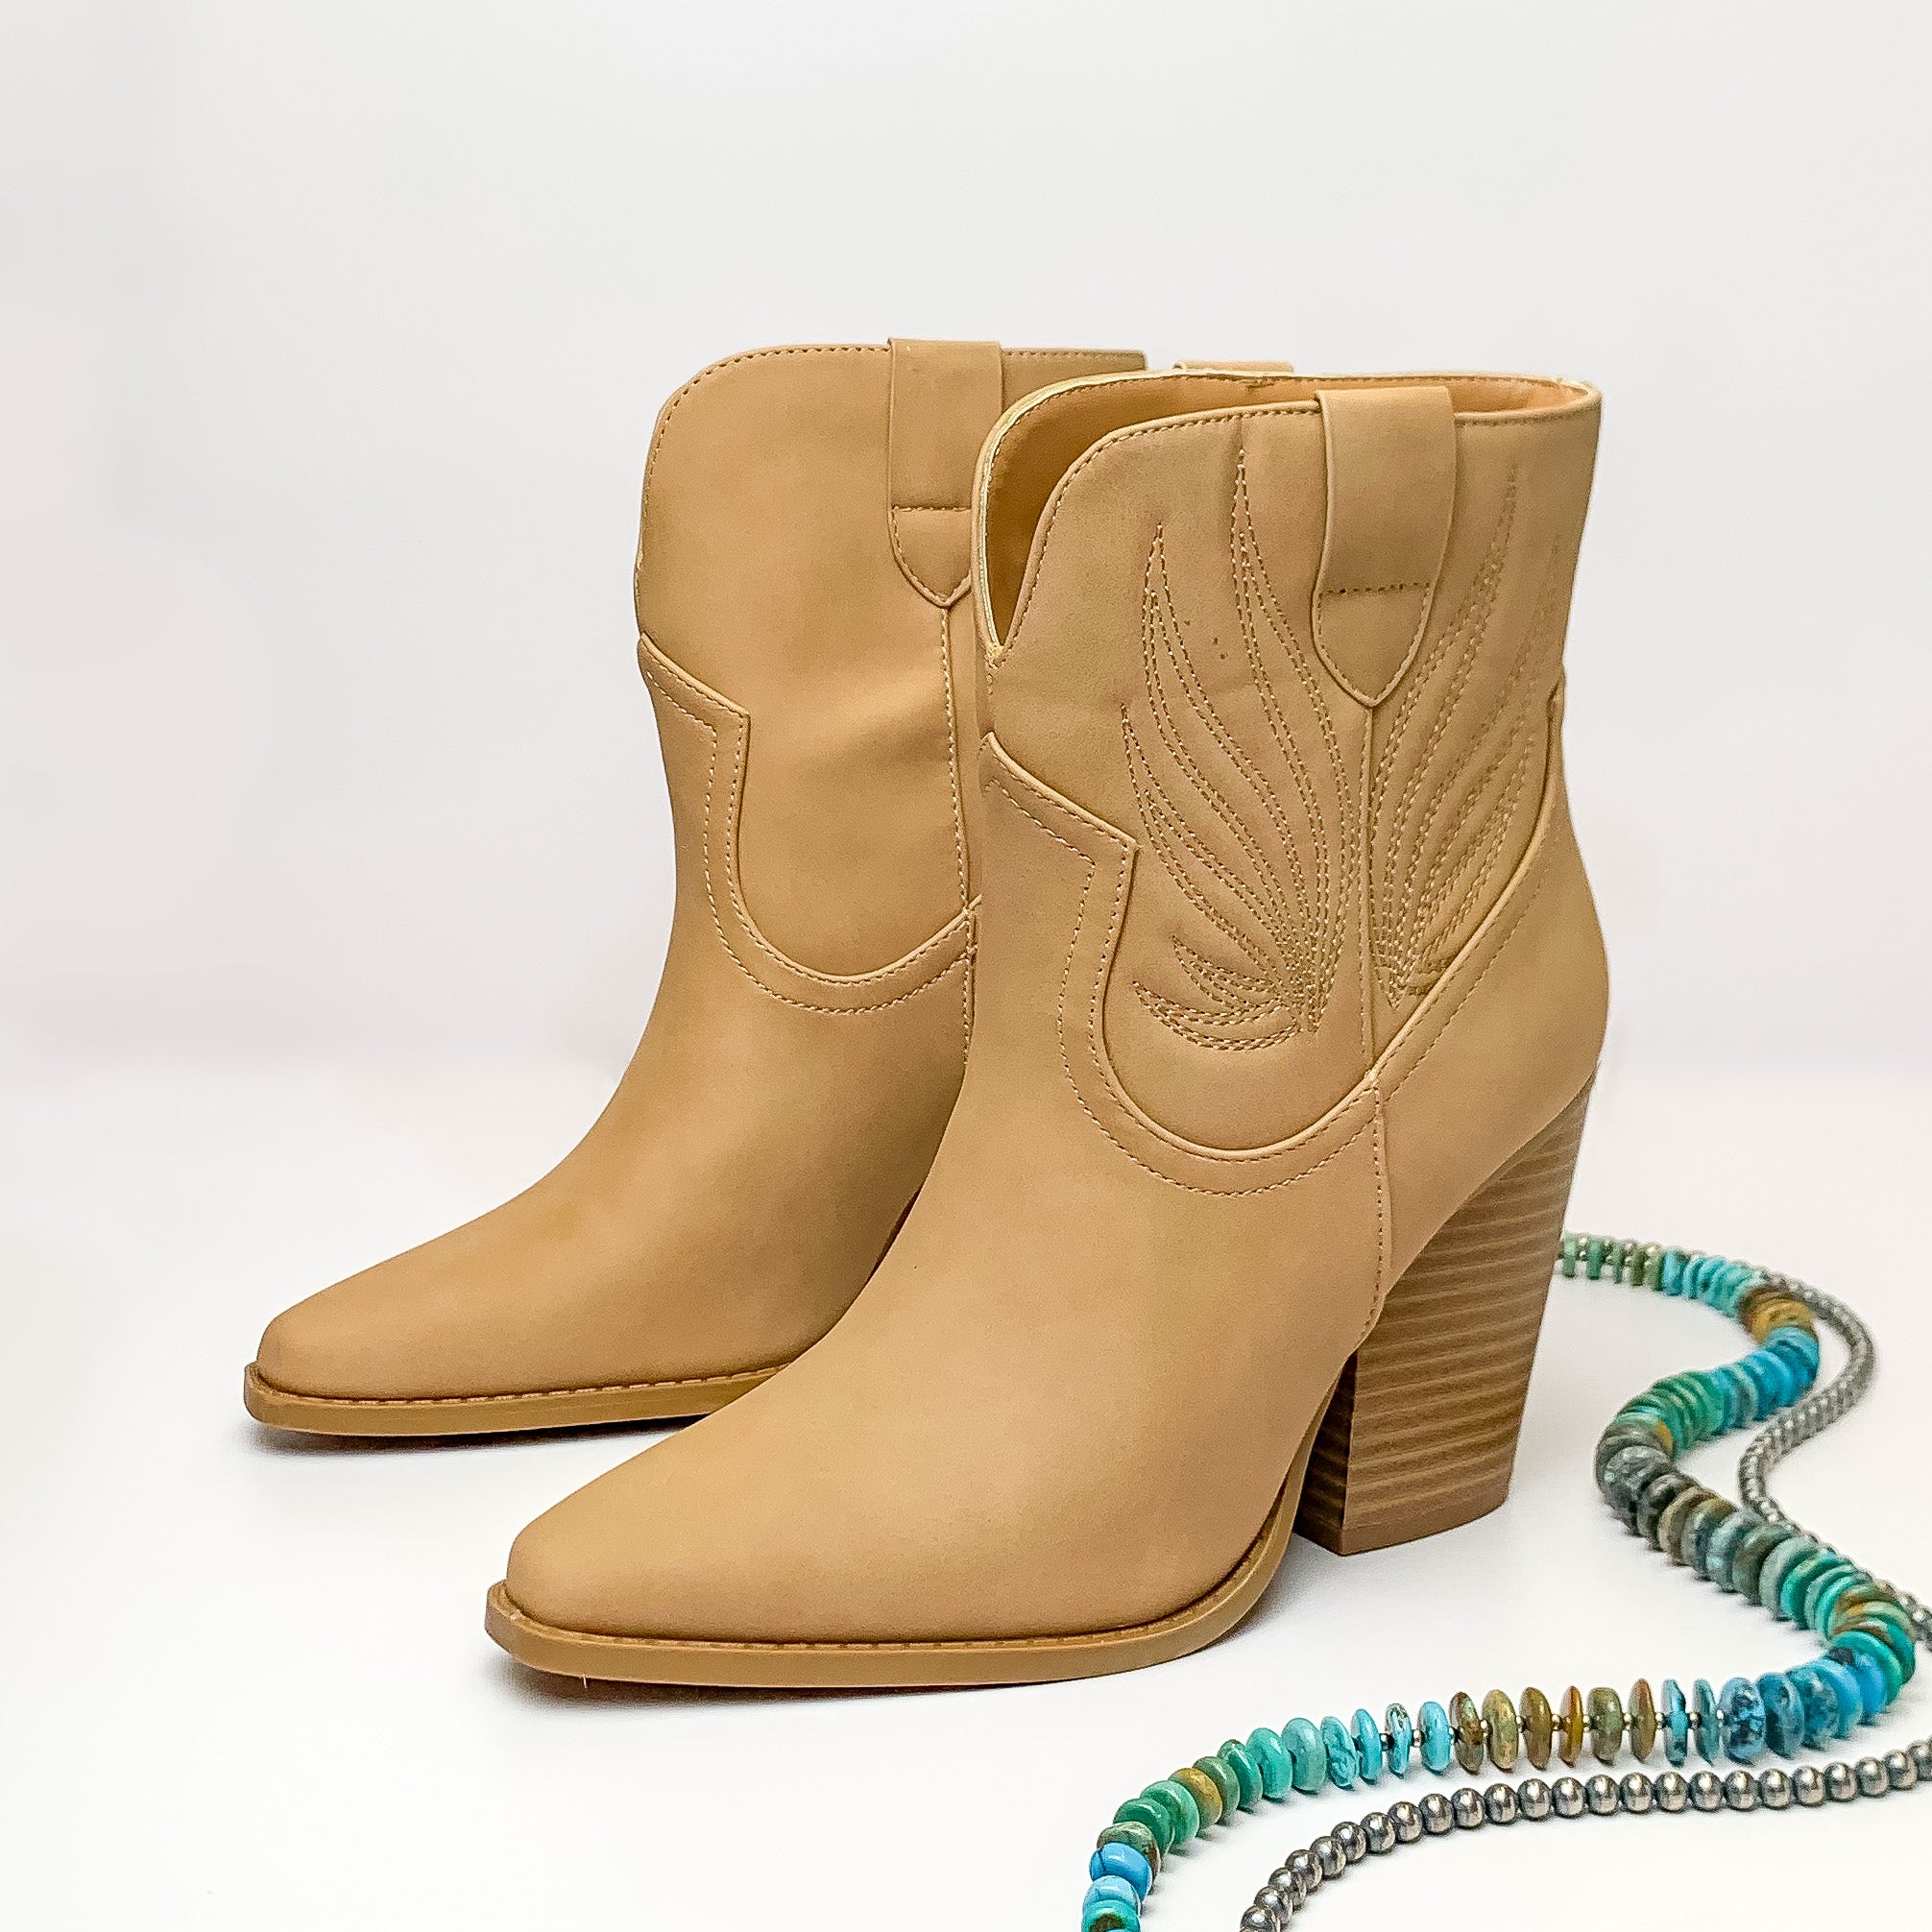 Not My First Rodeo Western Stitch Heeled Ankle Booties in Tan. Pictured on a white background with jewelry laying on the platform.